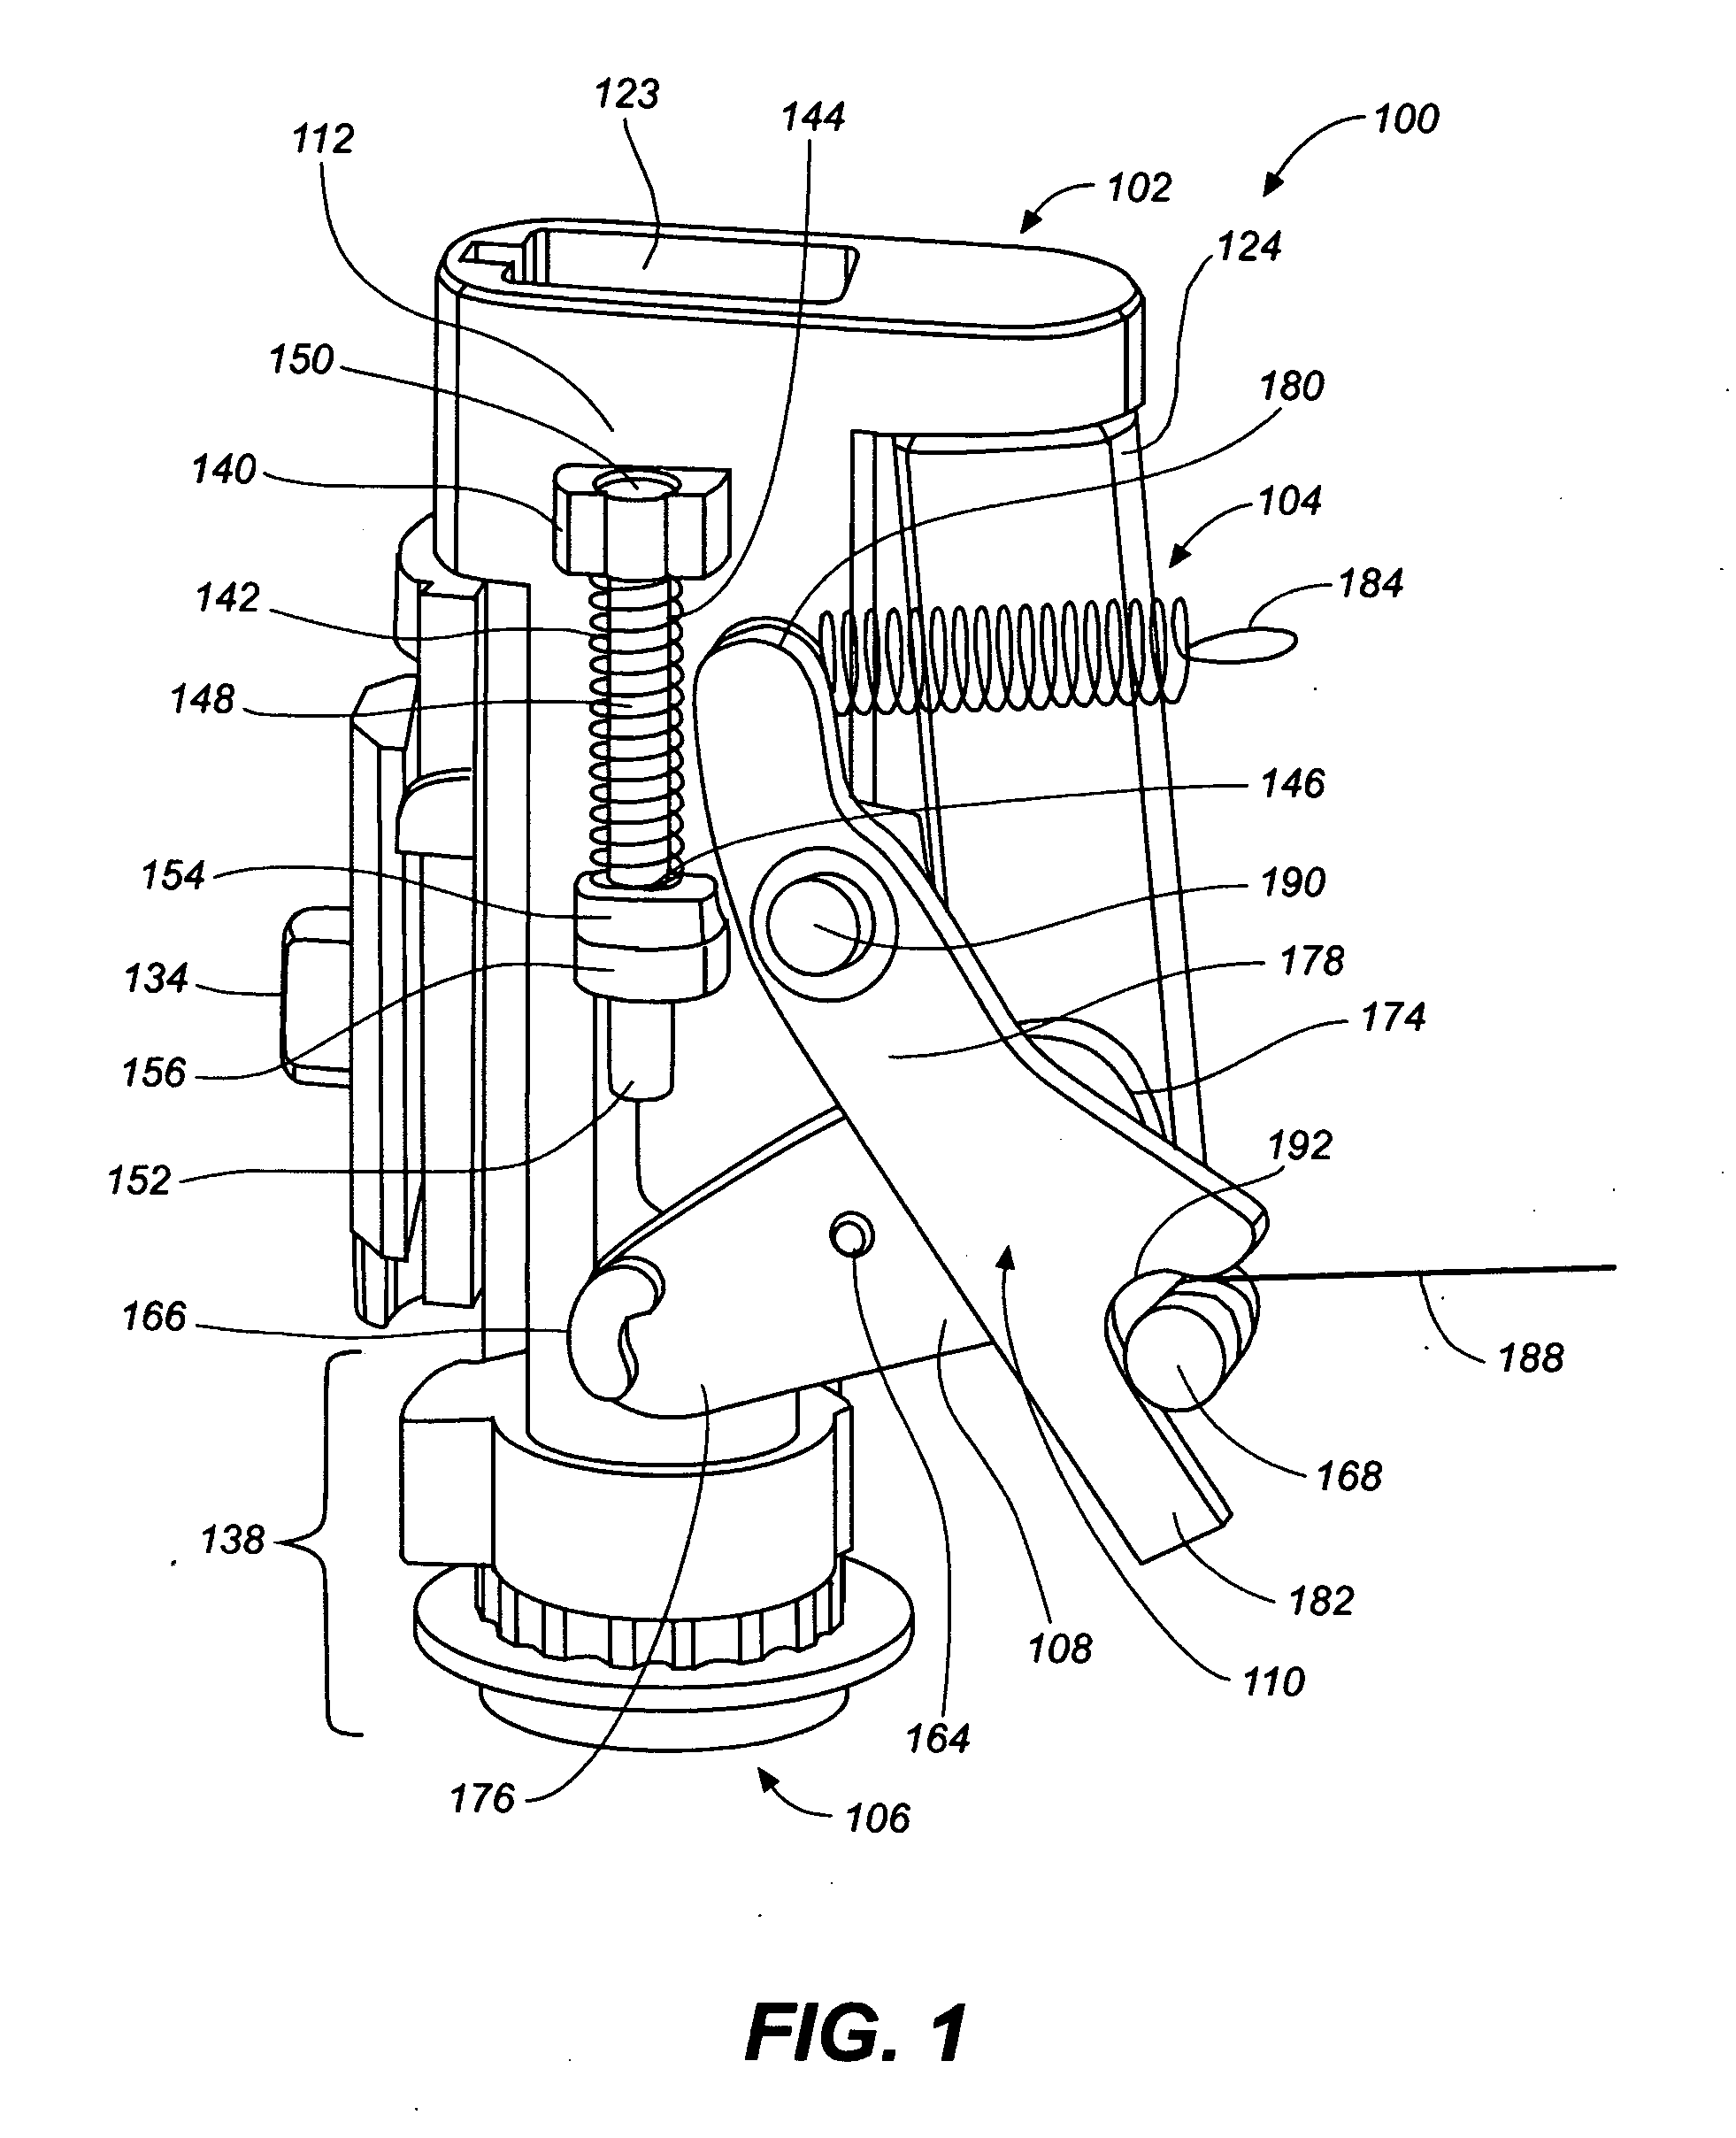 Analyte monitoring system with integrated lancing apparatus